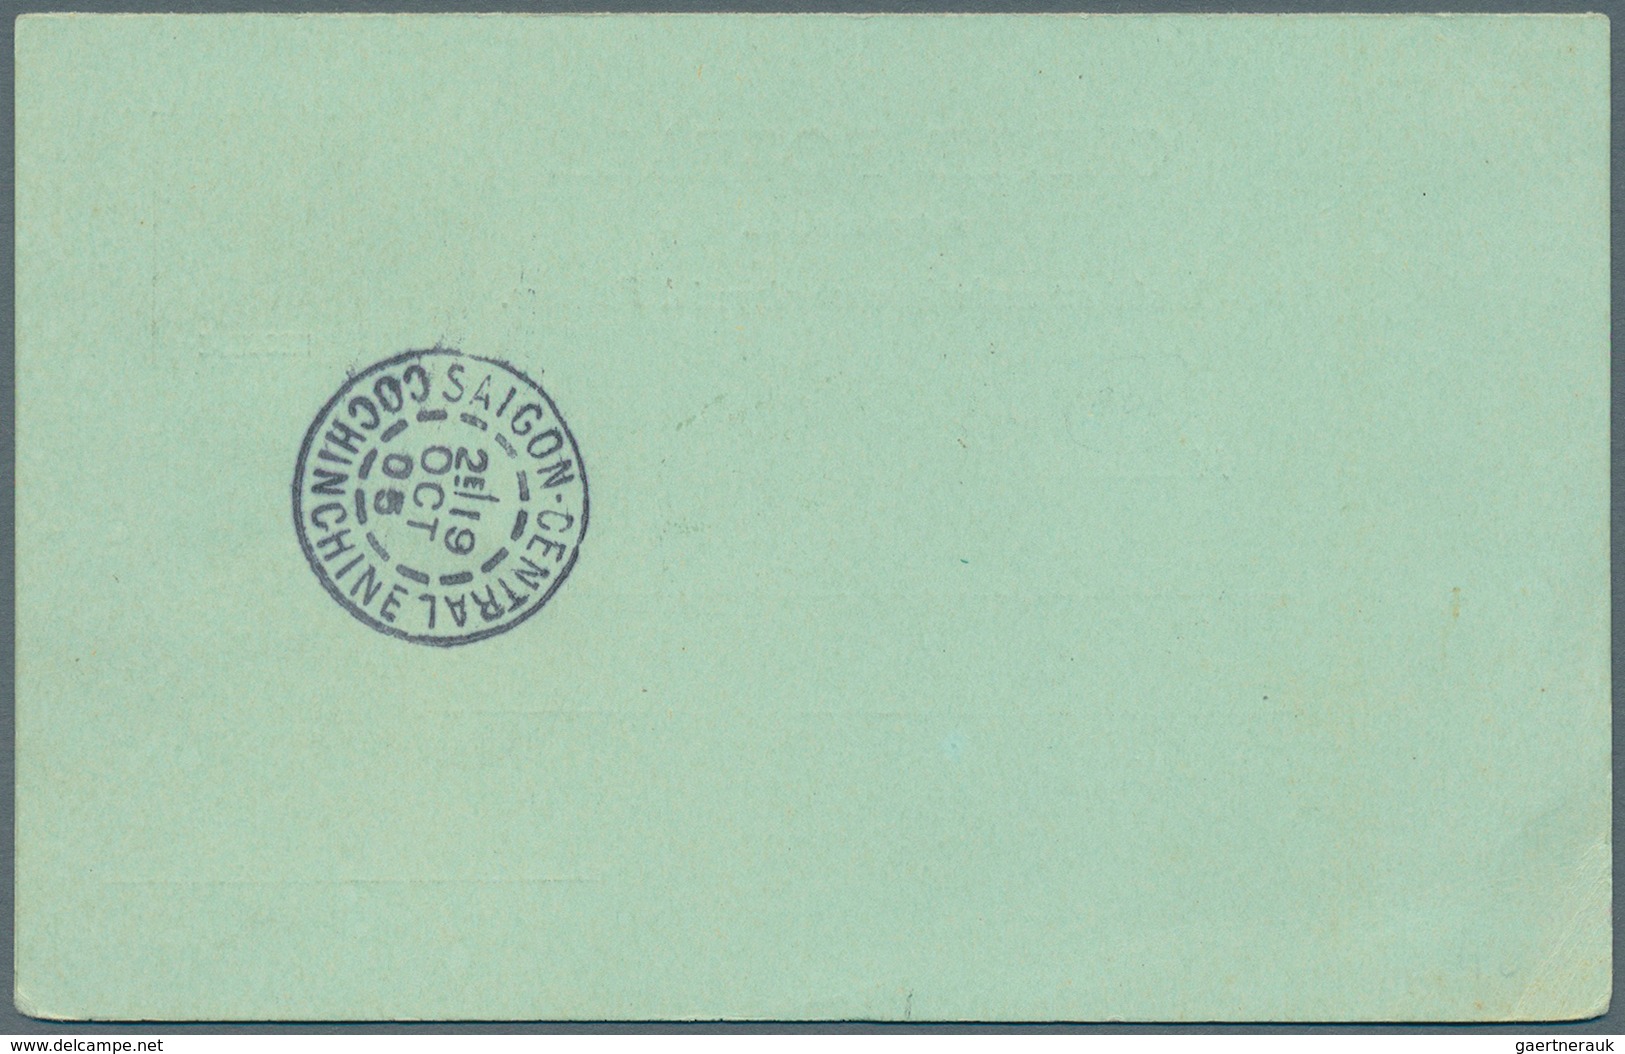 09326 Laos: 1905, Used Indochina Postal Stationery Double Card (1892 Issue) From BASSAC, LAOS To Rennes, F - Laos